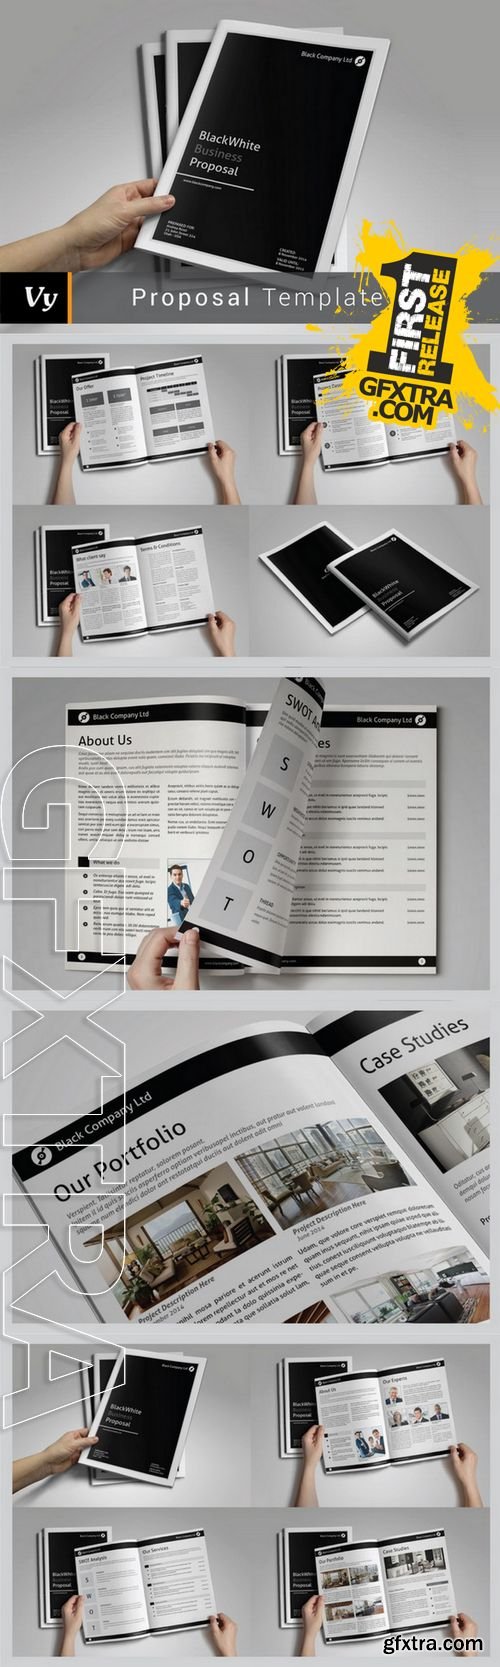 Business Proposal Template - CM 130385